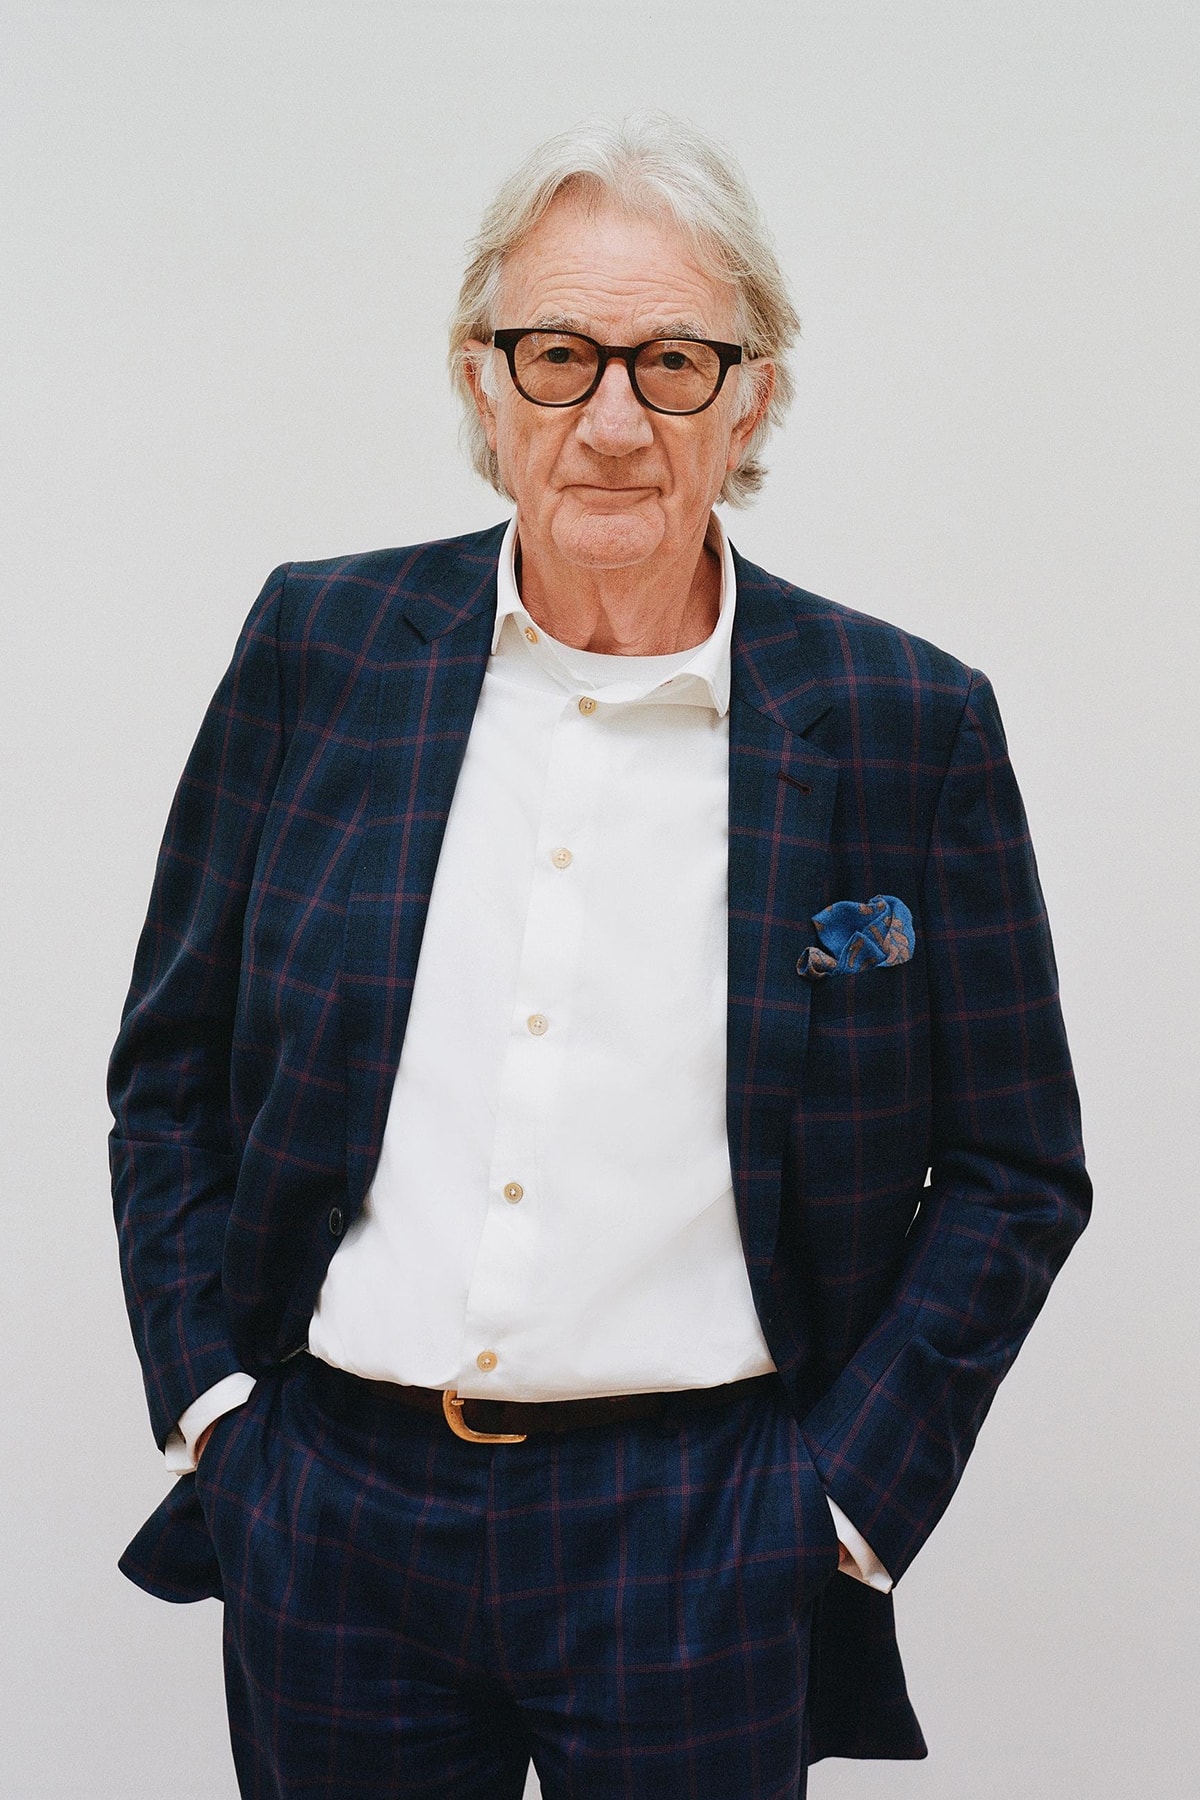 PAUL SMITH TO OPEN 106TH PITTI IMMAGINE UOMO IN JUNE WITH LAUNCH OF SPRING/SUMMER 2025 MENSWEAR COLLECTION